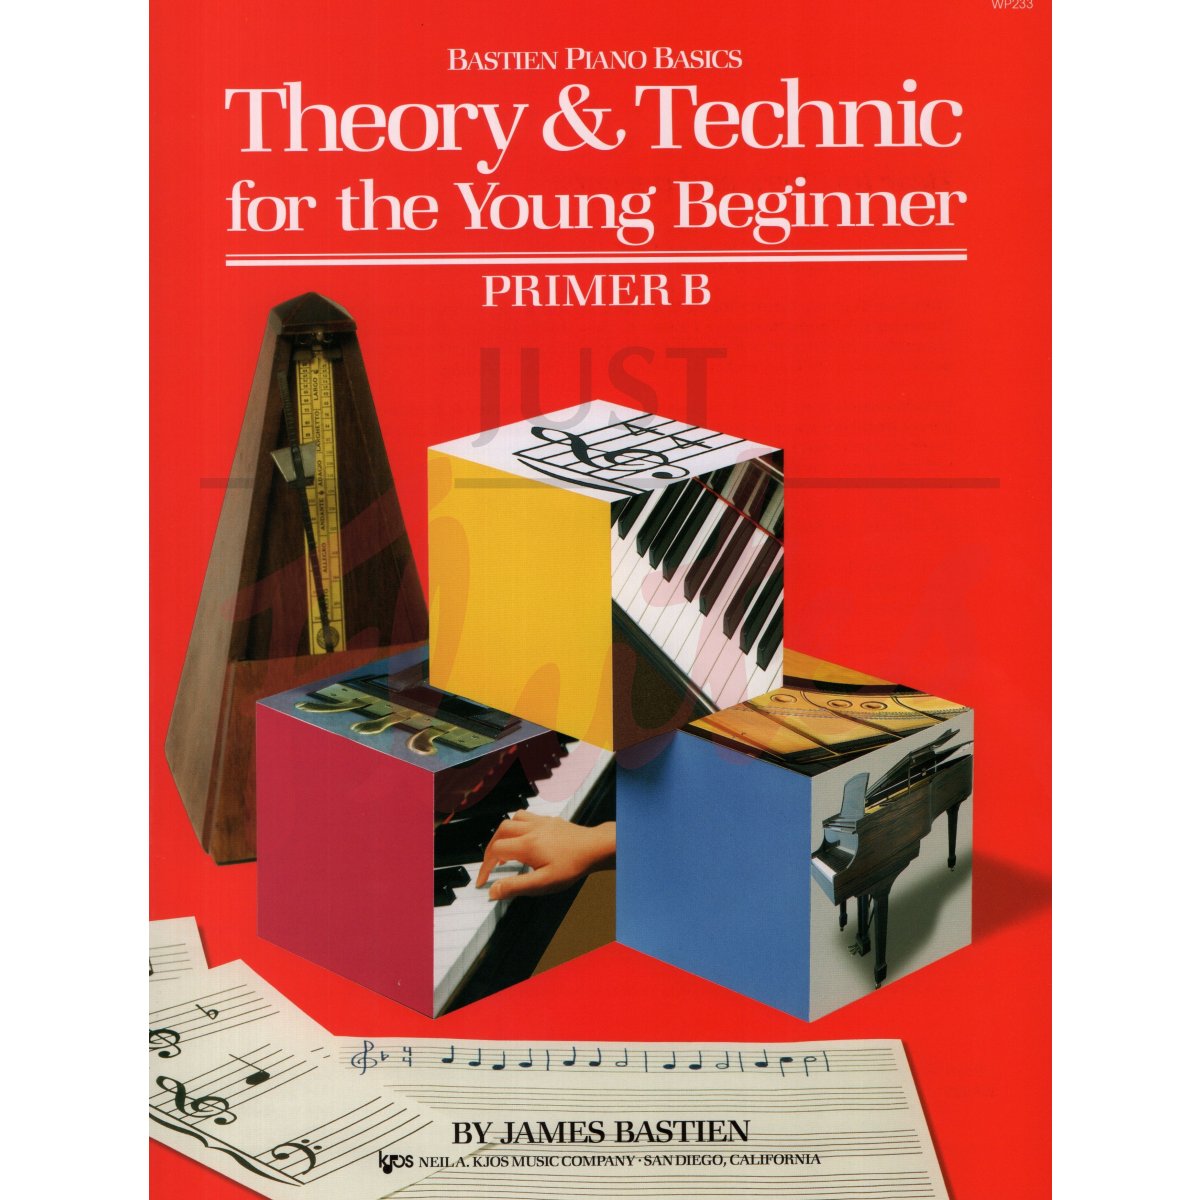 Theory &amp; Technic for the Young Beginner: Primer B [Piano]